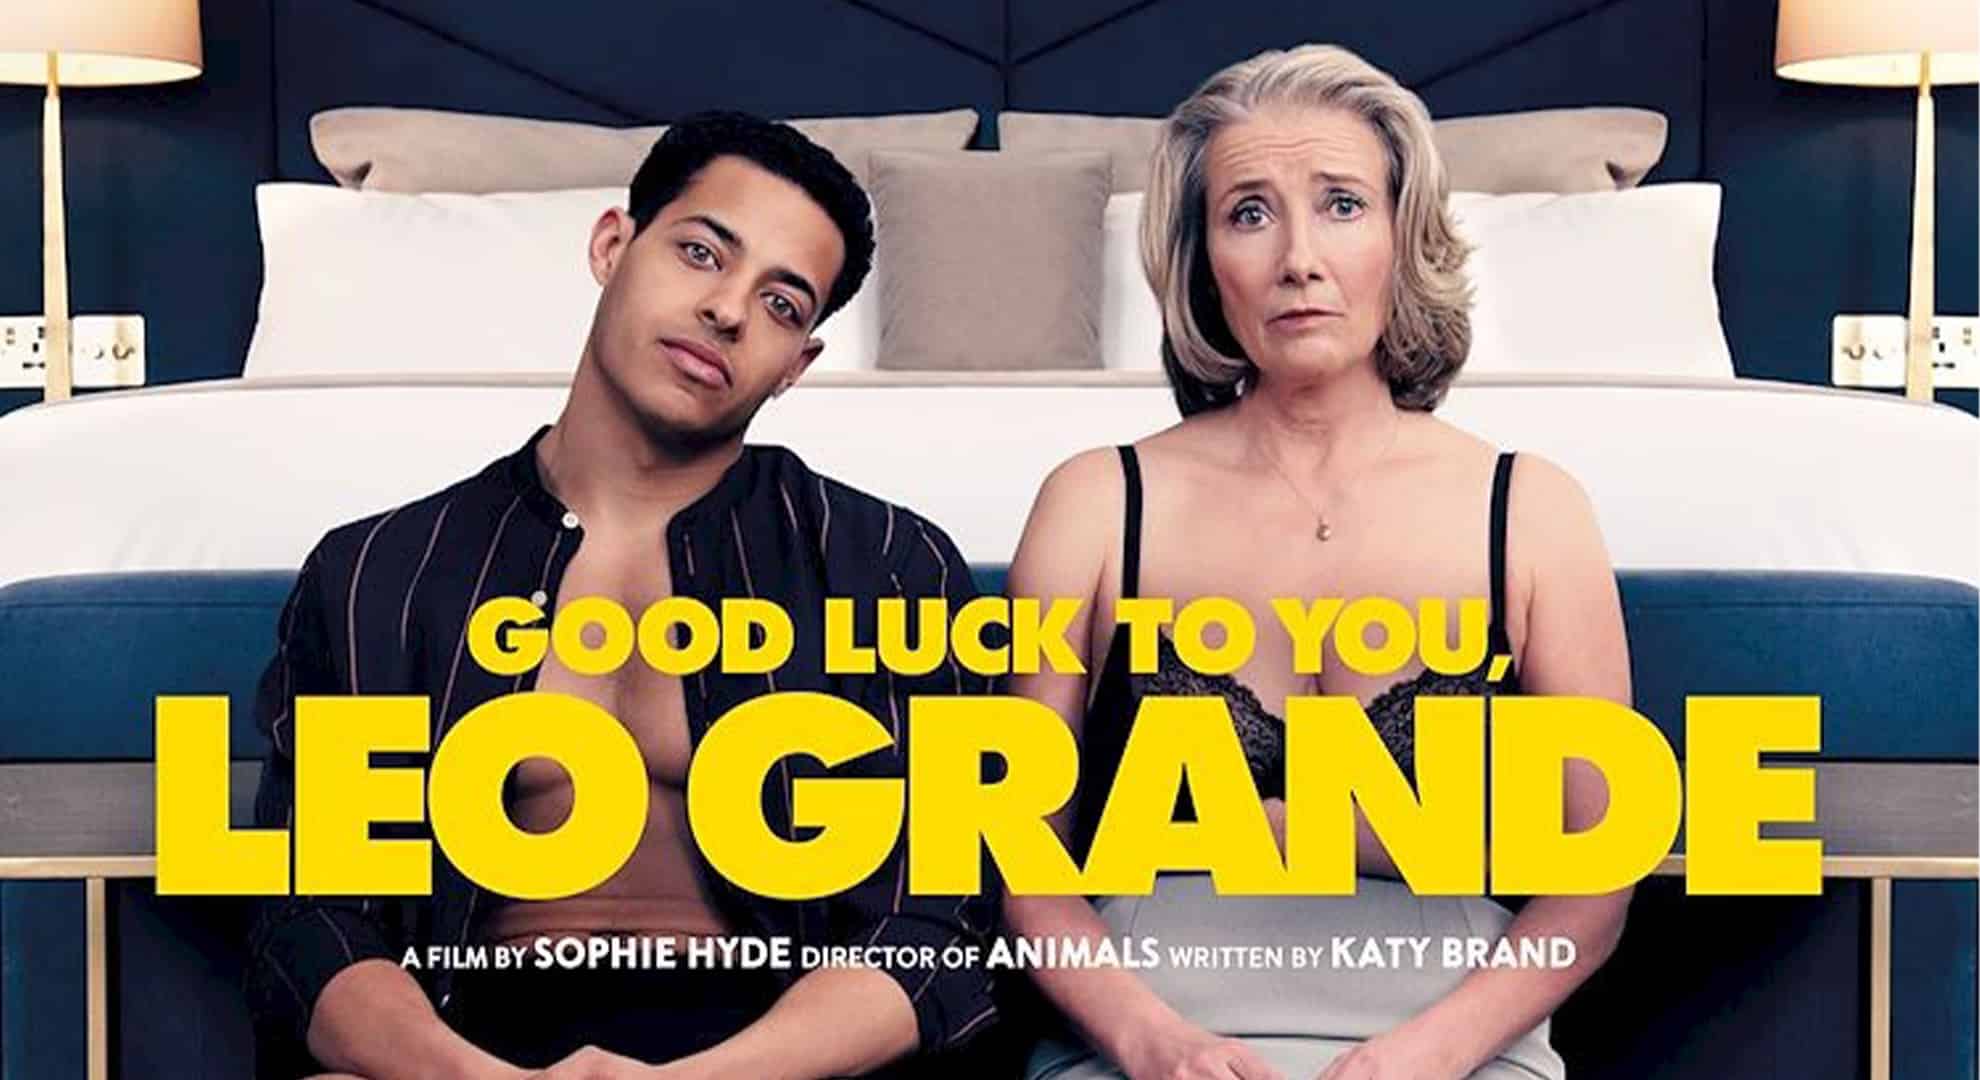 good-luck-to-you-leo-grande_ps_1_jpg_sd-low_copyright-2022-ww-entertainment.1250x0